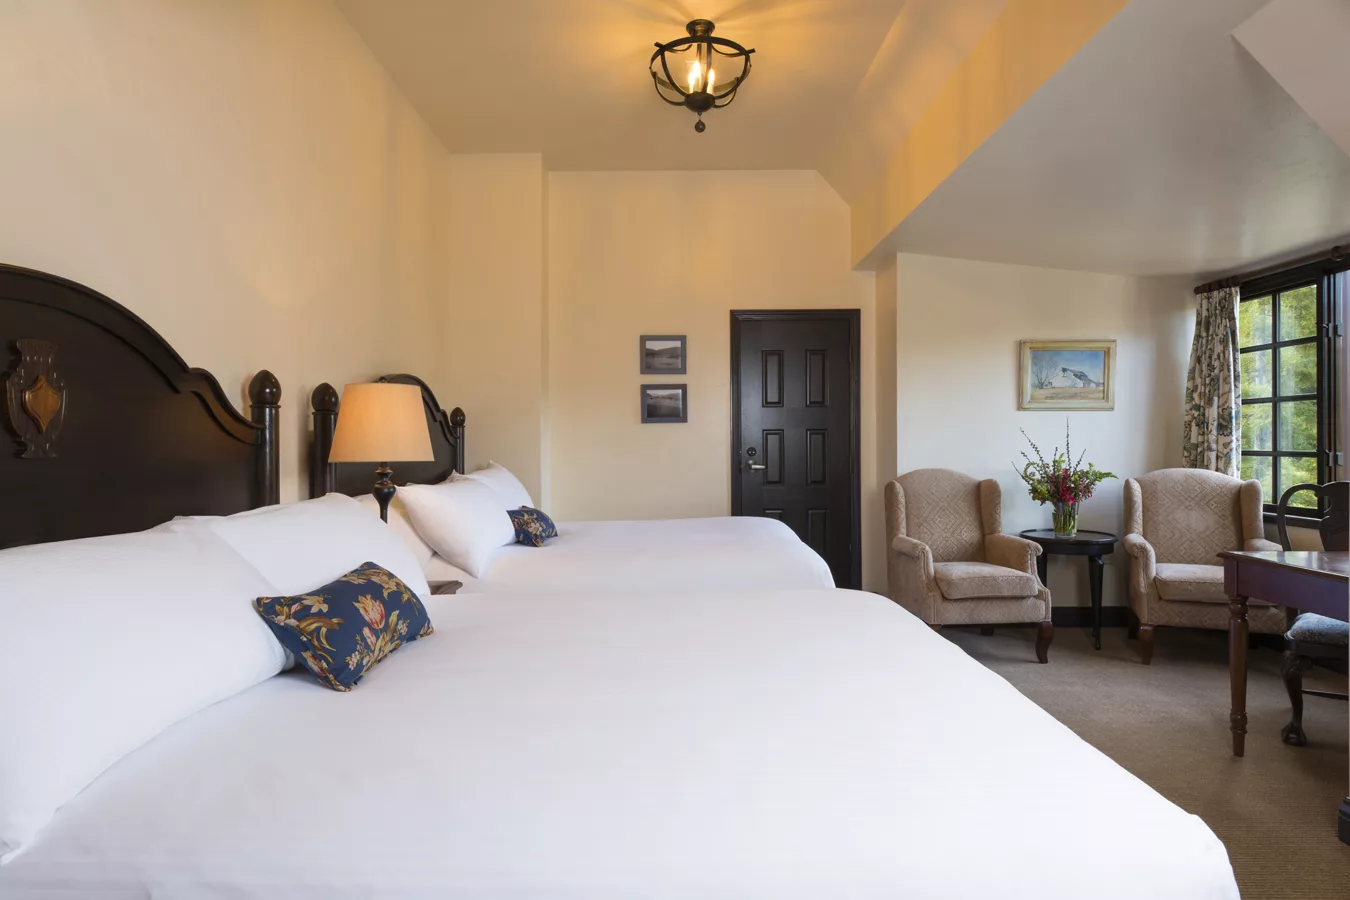 banner image is of Double bed room at Benbow Historic Inn